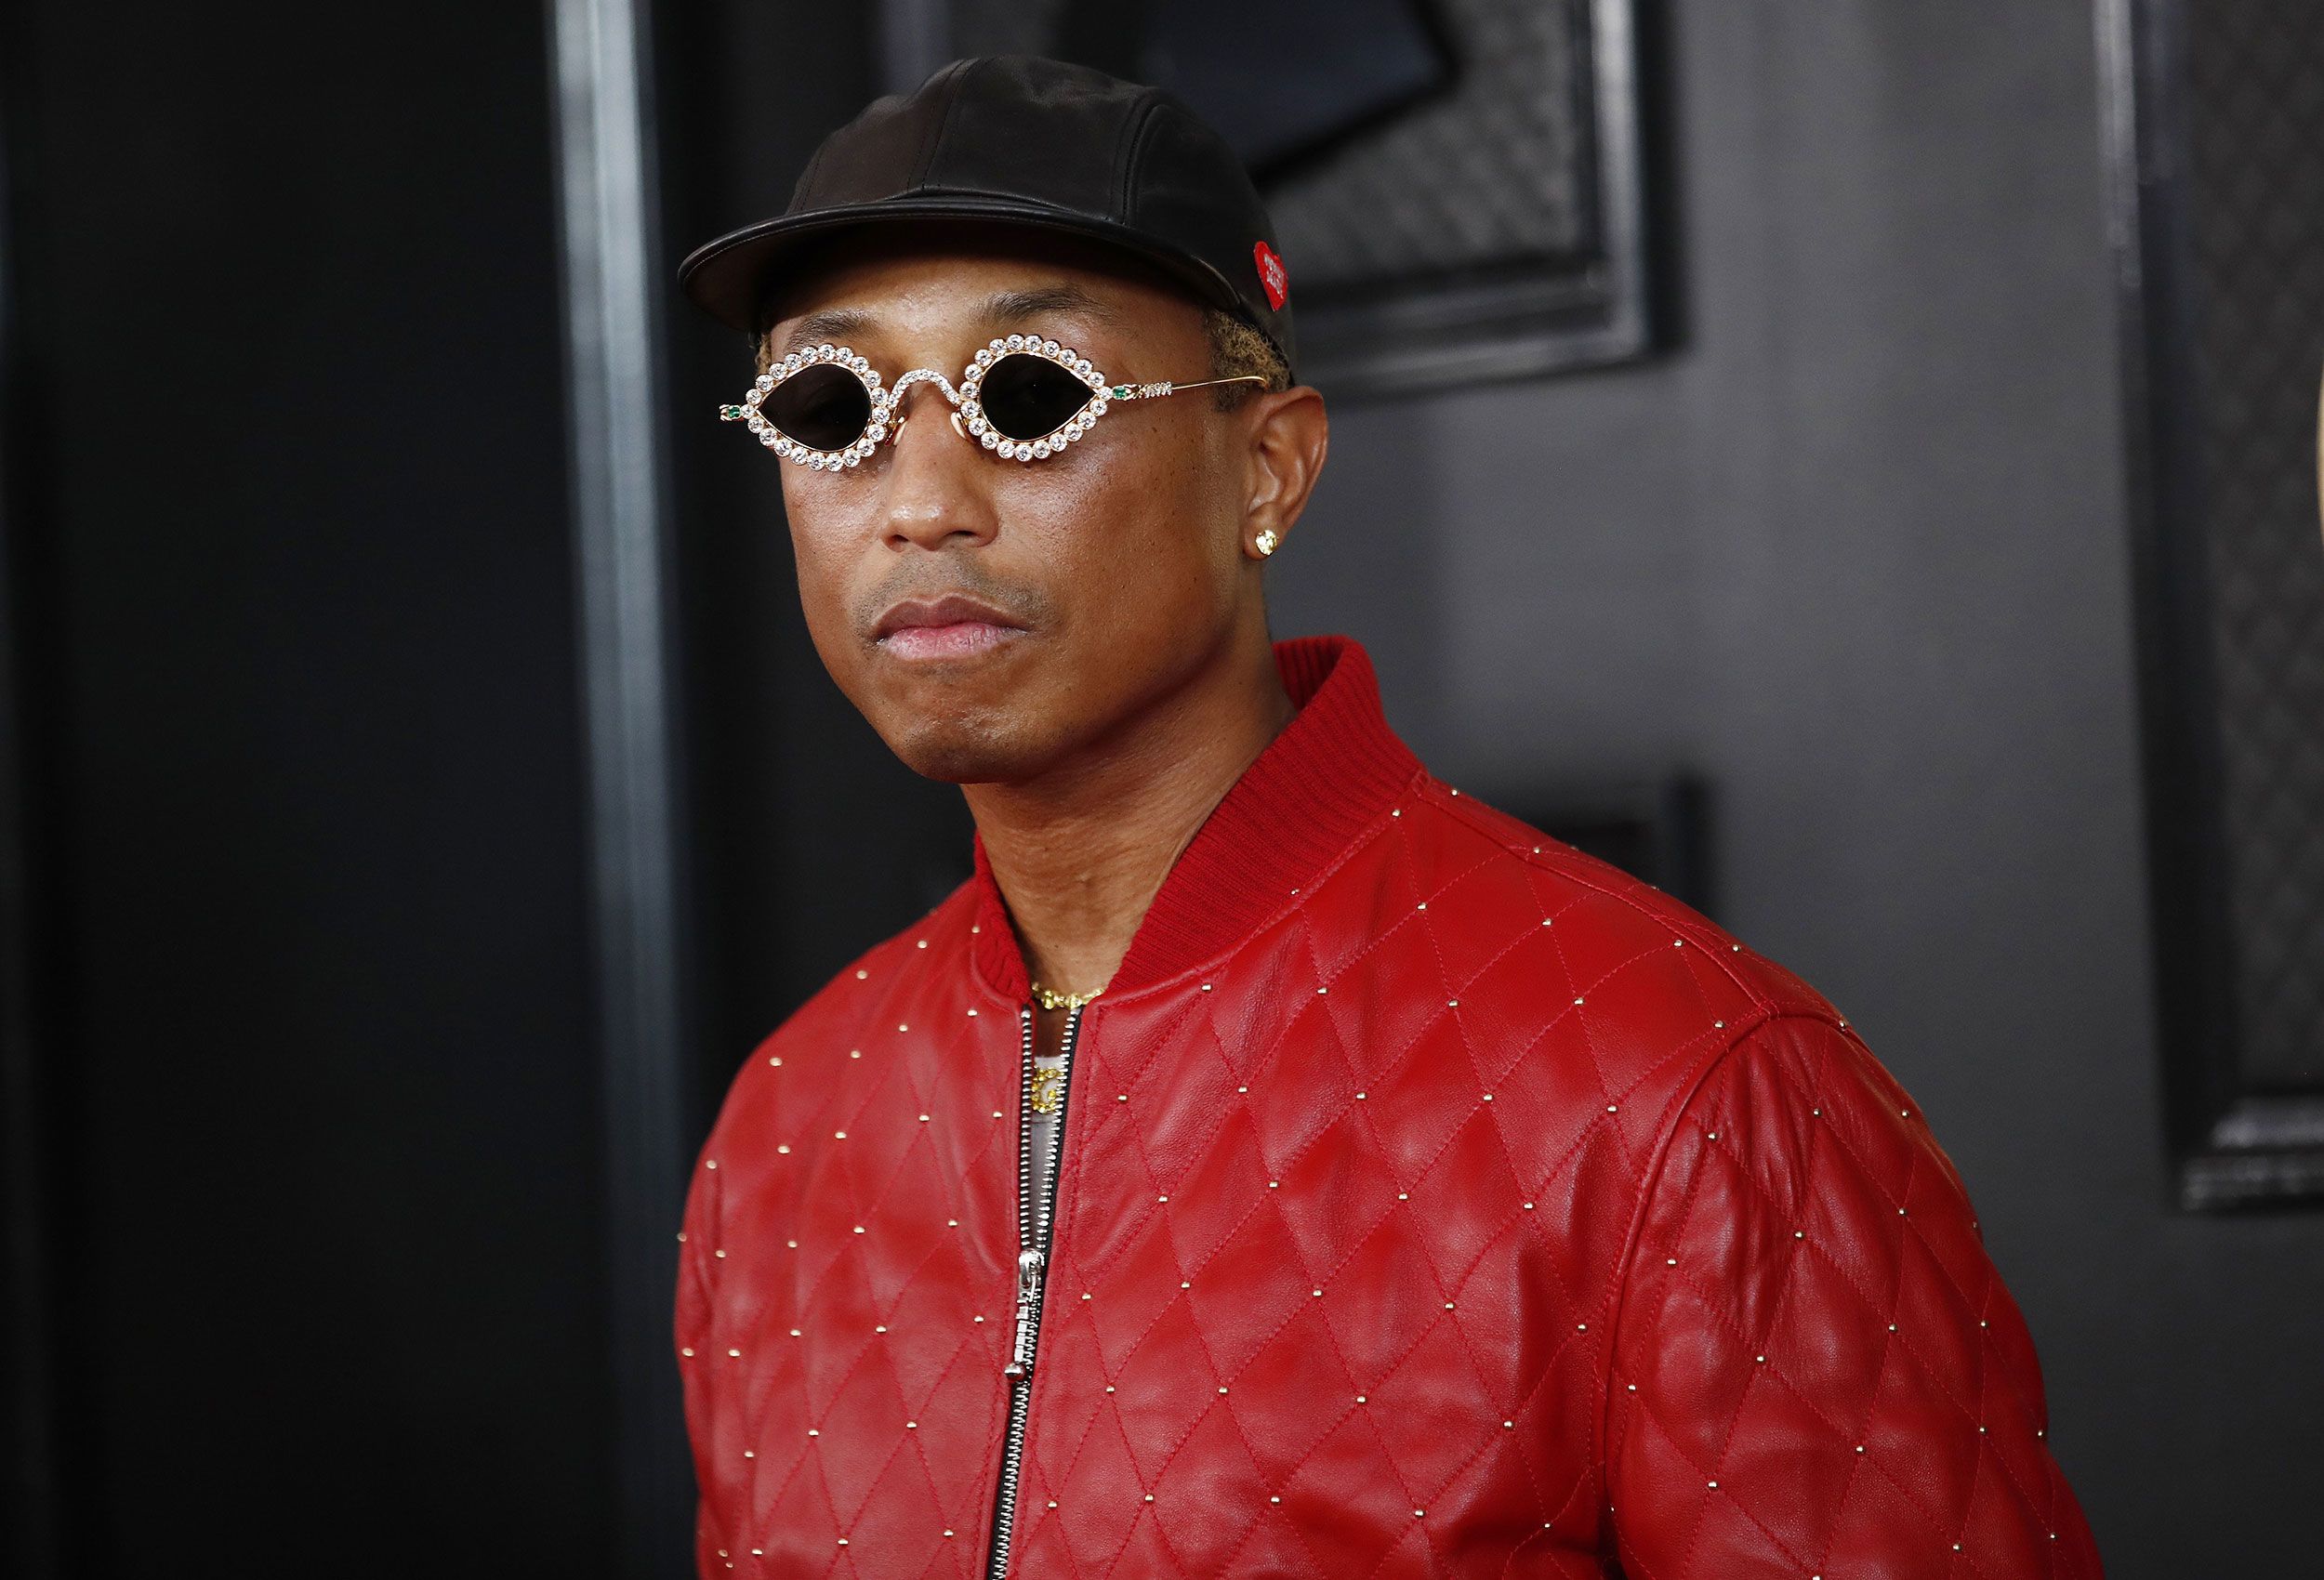 Pharrell Williams wearing a red jacket and sunglasses